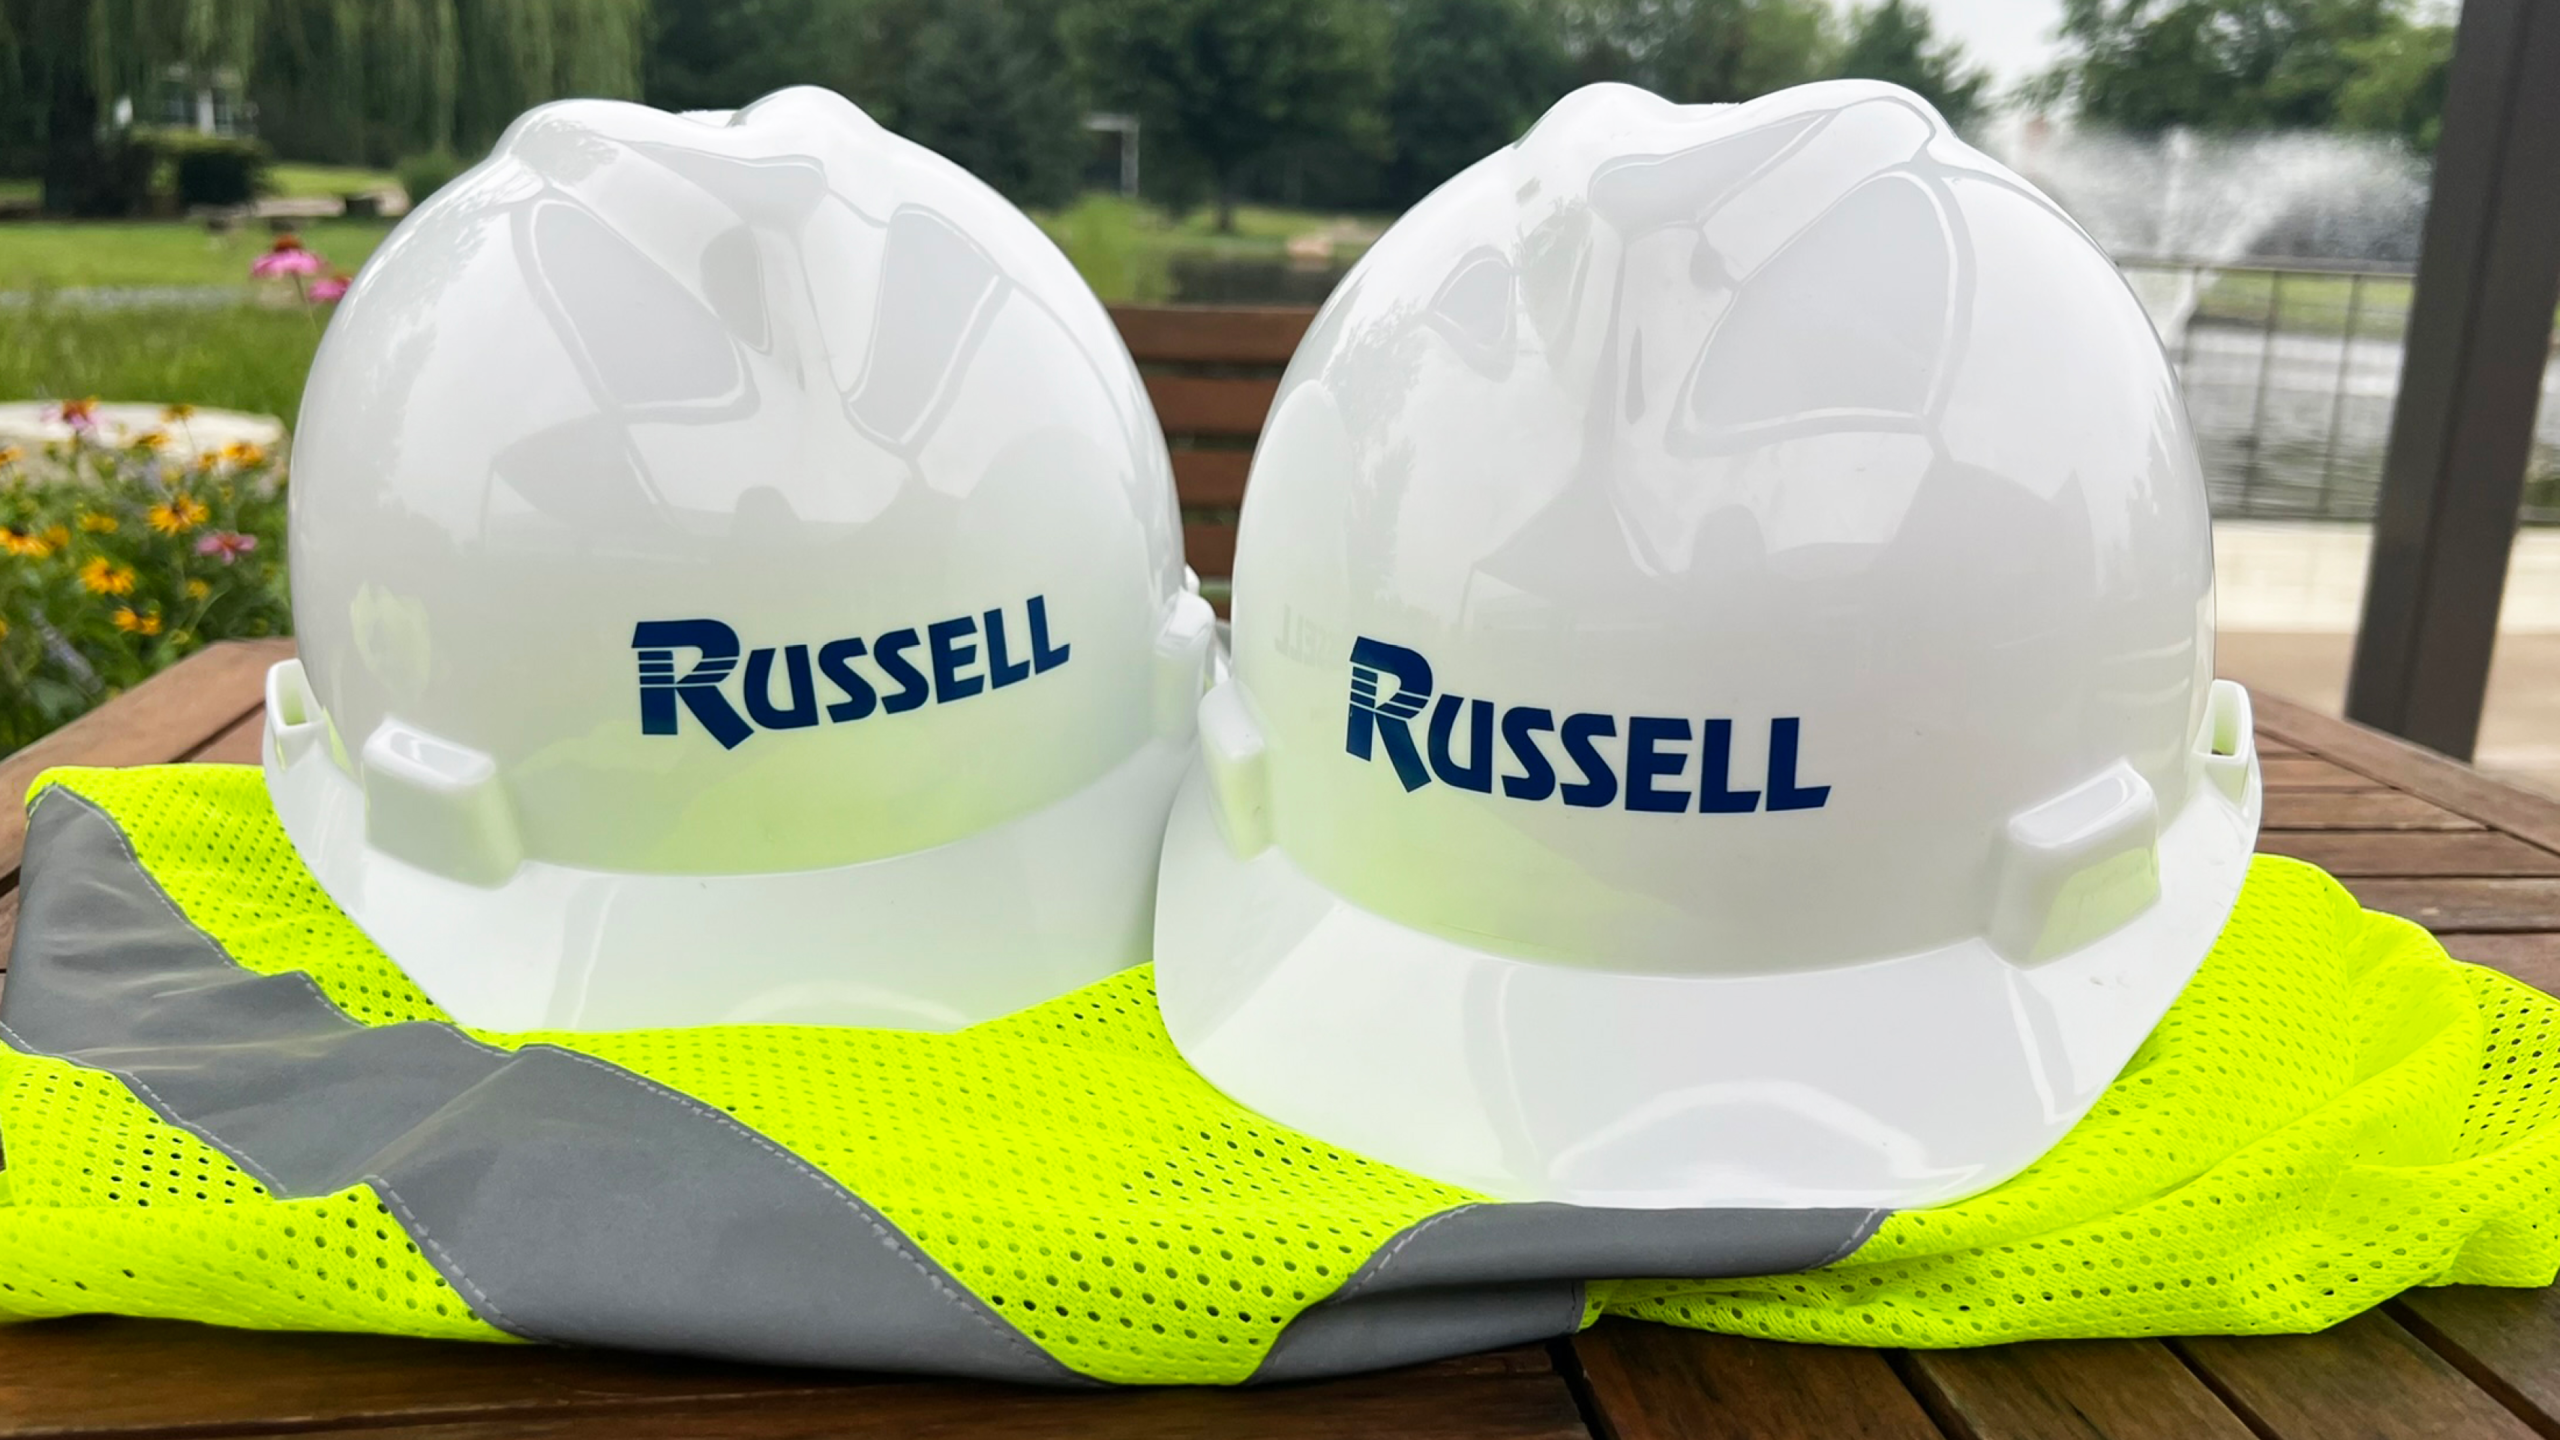 Two Russell hard hats on top of a safety vest.